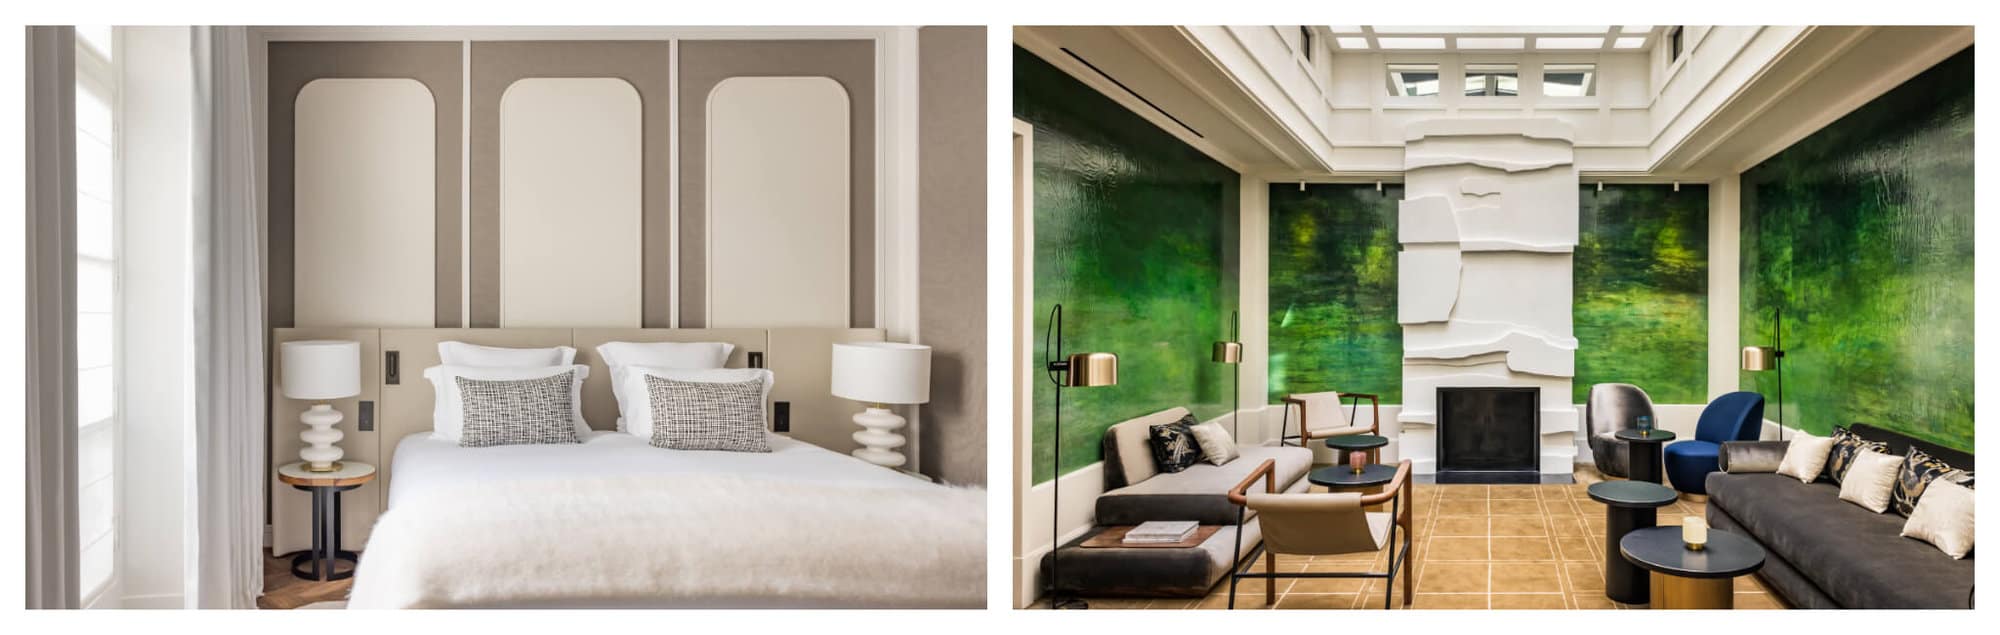 Left: A bedroom with white bedsheet, beige walls, and white night lamps at the Pavillon Faubourg Saint-Germain hotel. Right: A lounge at the Pavillon Faubourg Saint-Germain with green walls, brown floor, and a white fireplace in the middle.